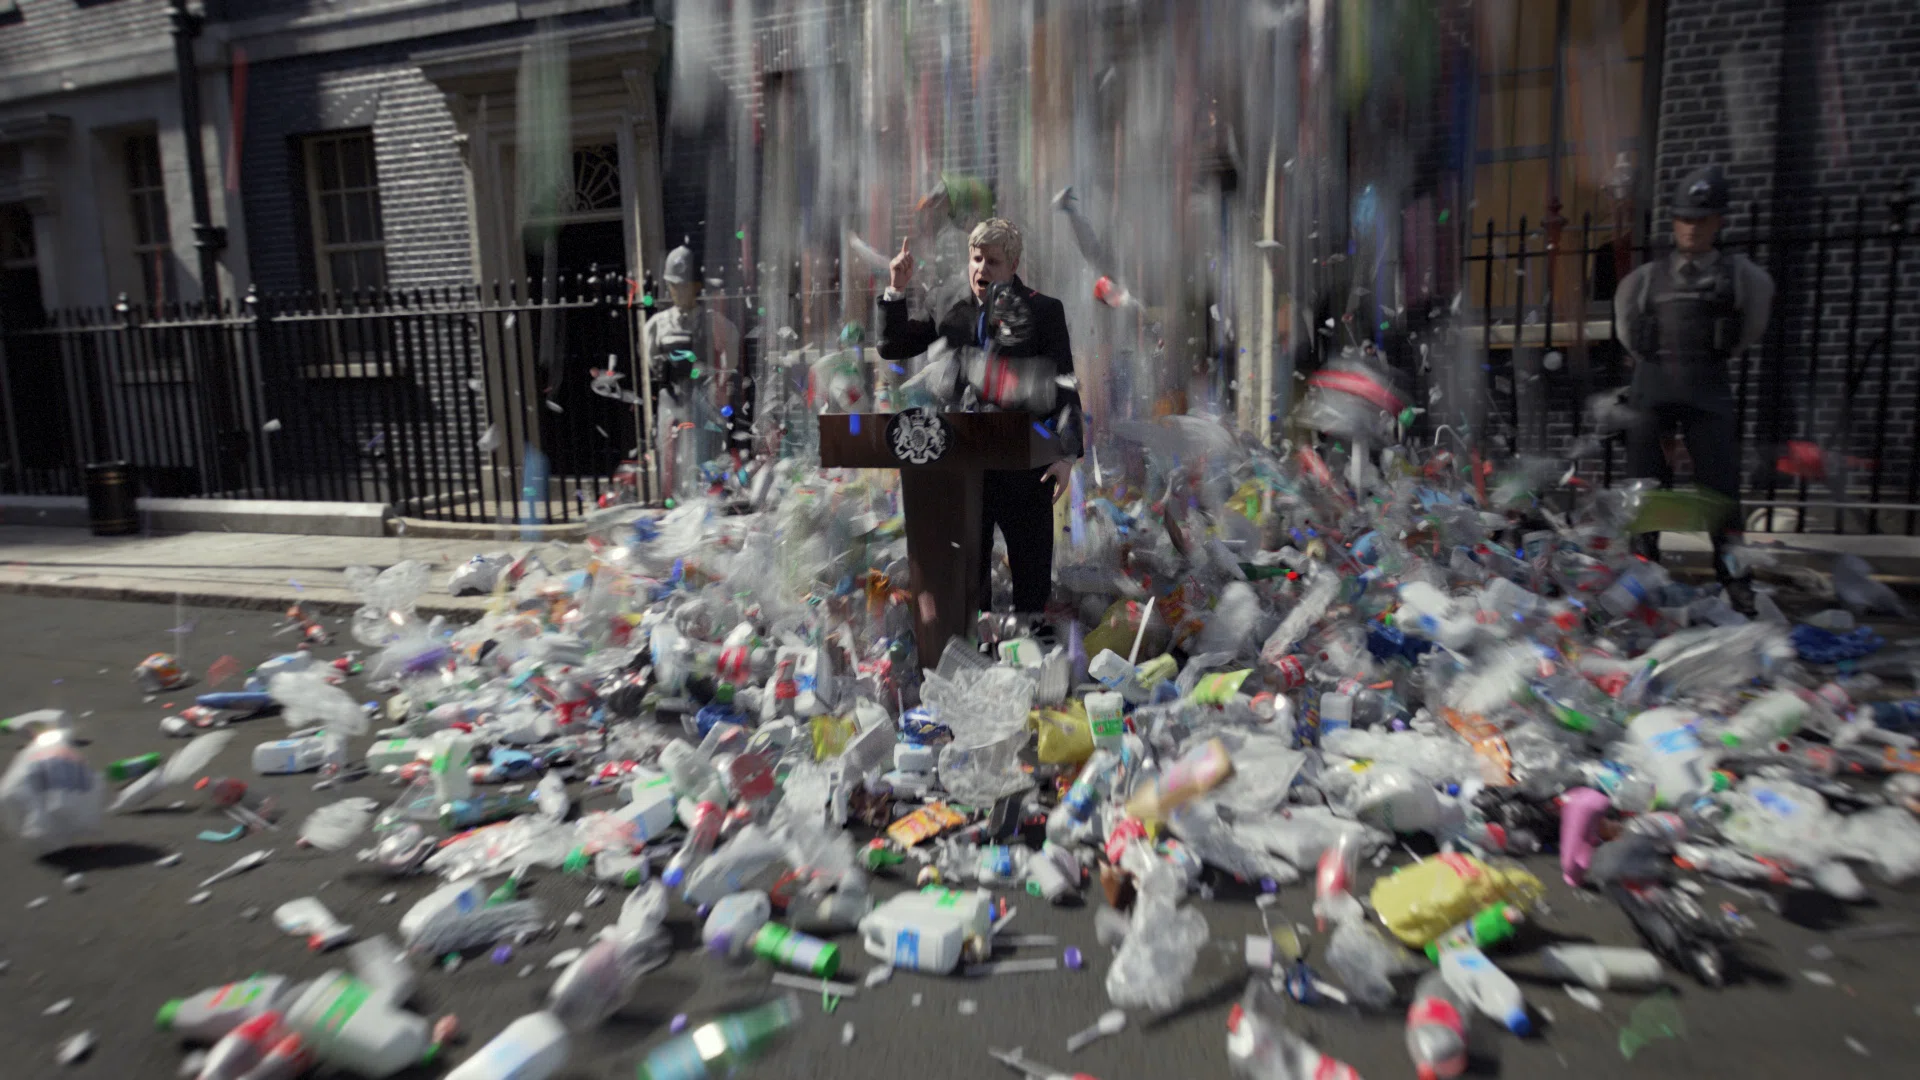 Just how did Greenpeace drown Downing Street in plastic waste?